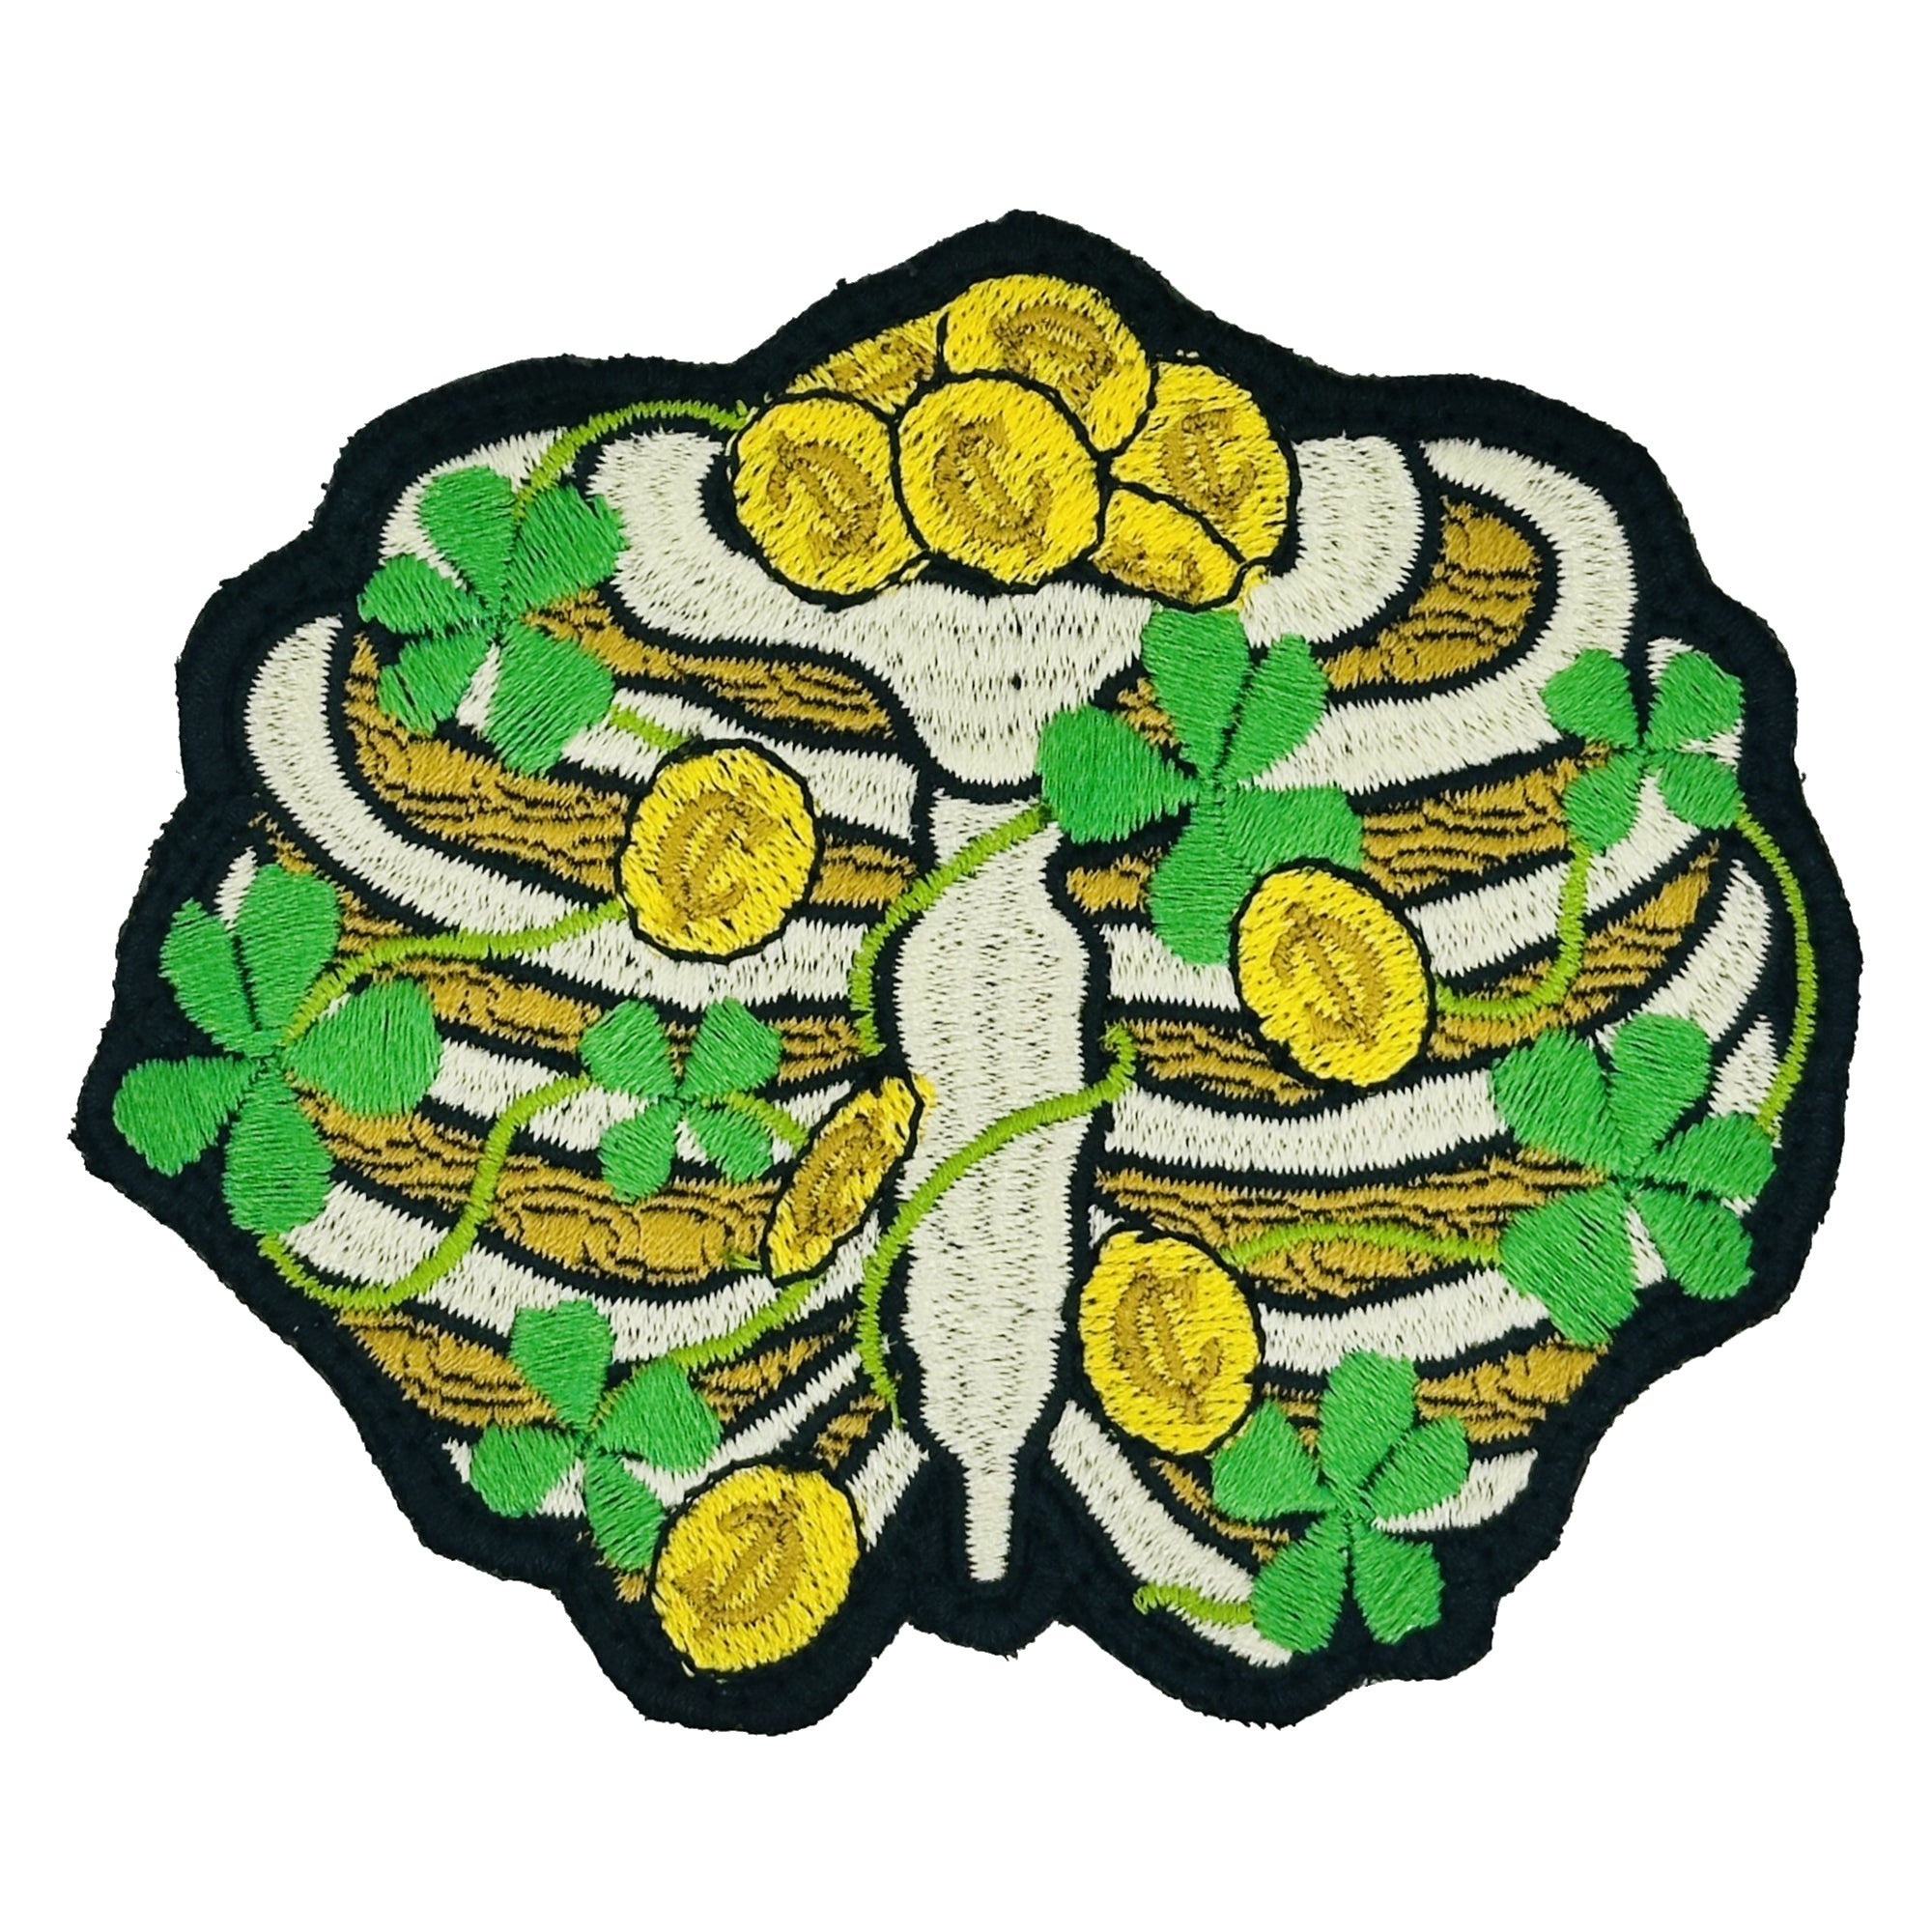 Ribcage Pot of Gold Coins 4 leaf clover  - 4" Embroidered Patch - No Lucks Given Collection